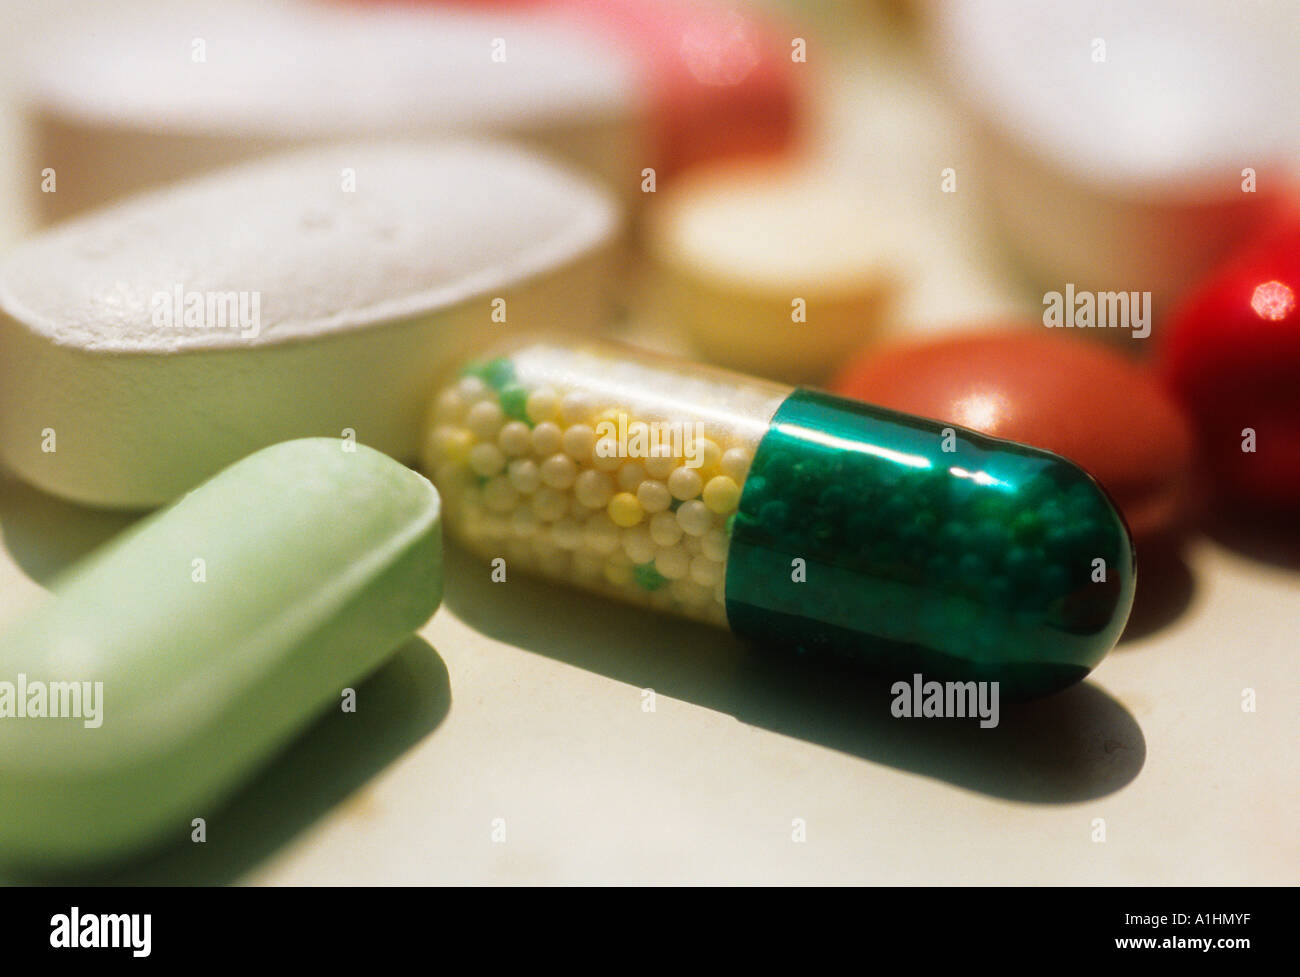 Pills. Capsule and pill. Close up of mixed prescription medications. Pharmaceutical industry. Drug remedy medicine for relief of pain and illness. USA Stock Photo